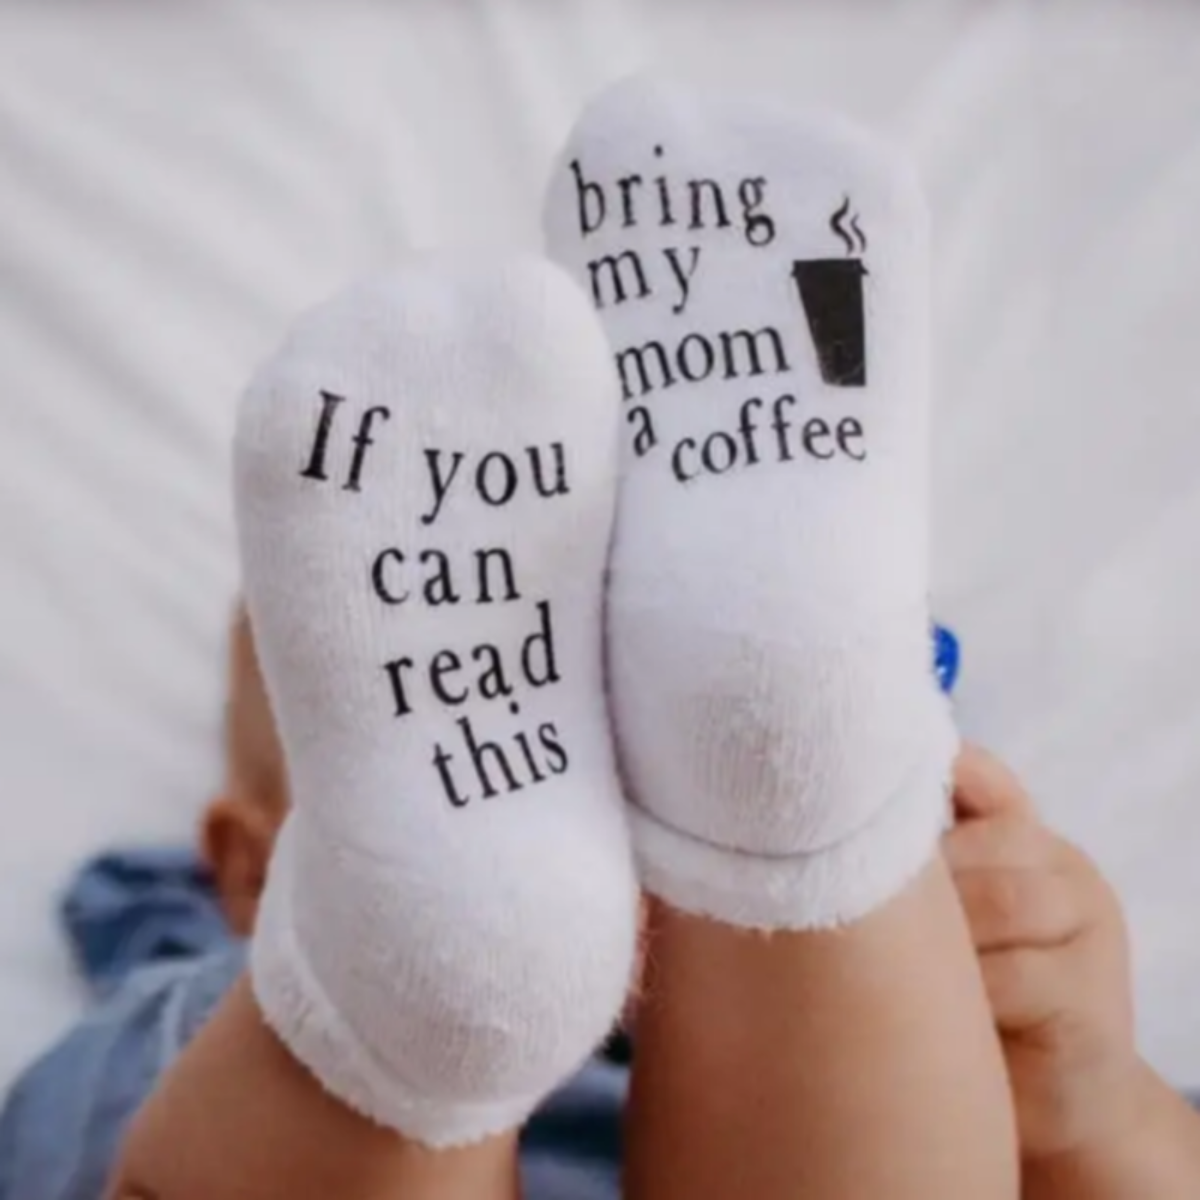 Funny baby socks If you can read this bring my mom a coffee baby socks